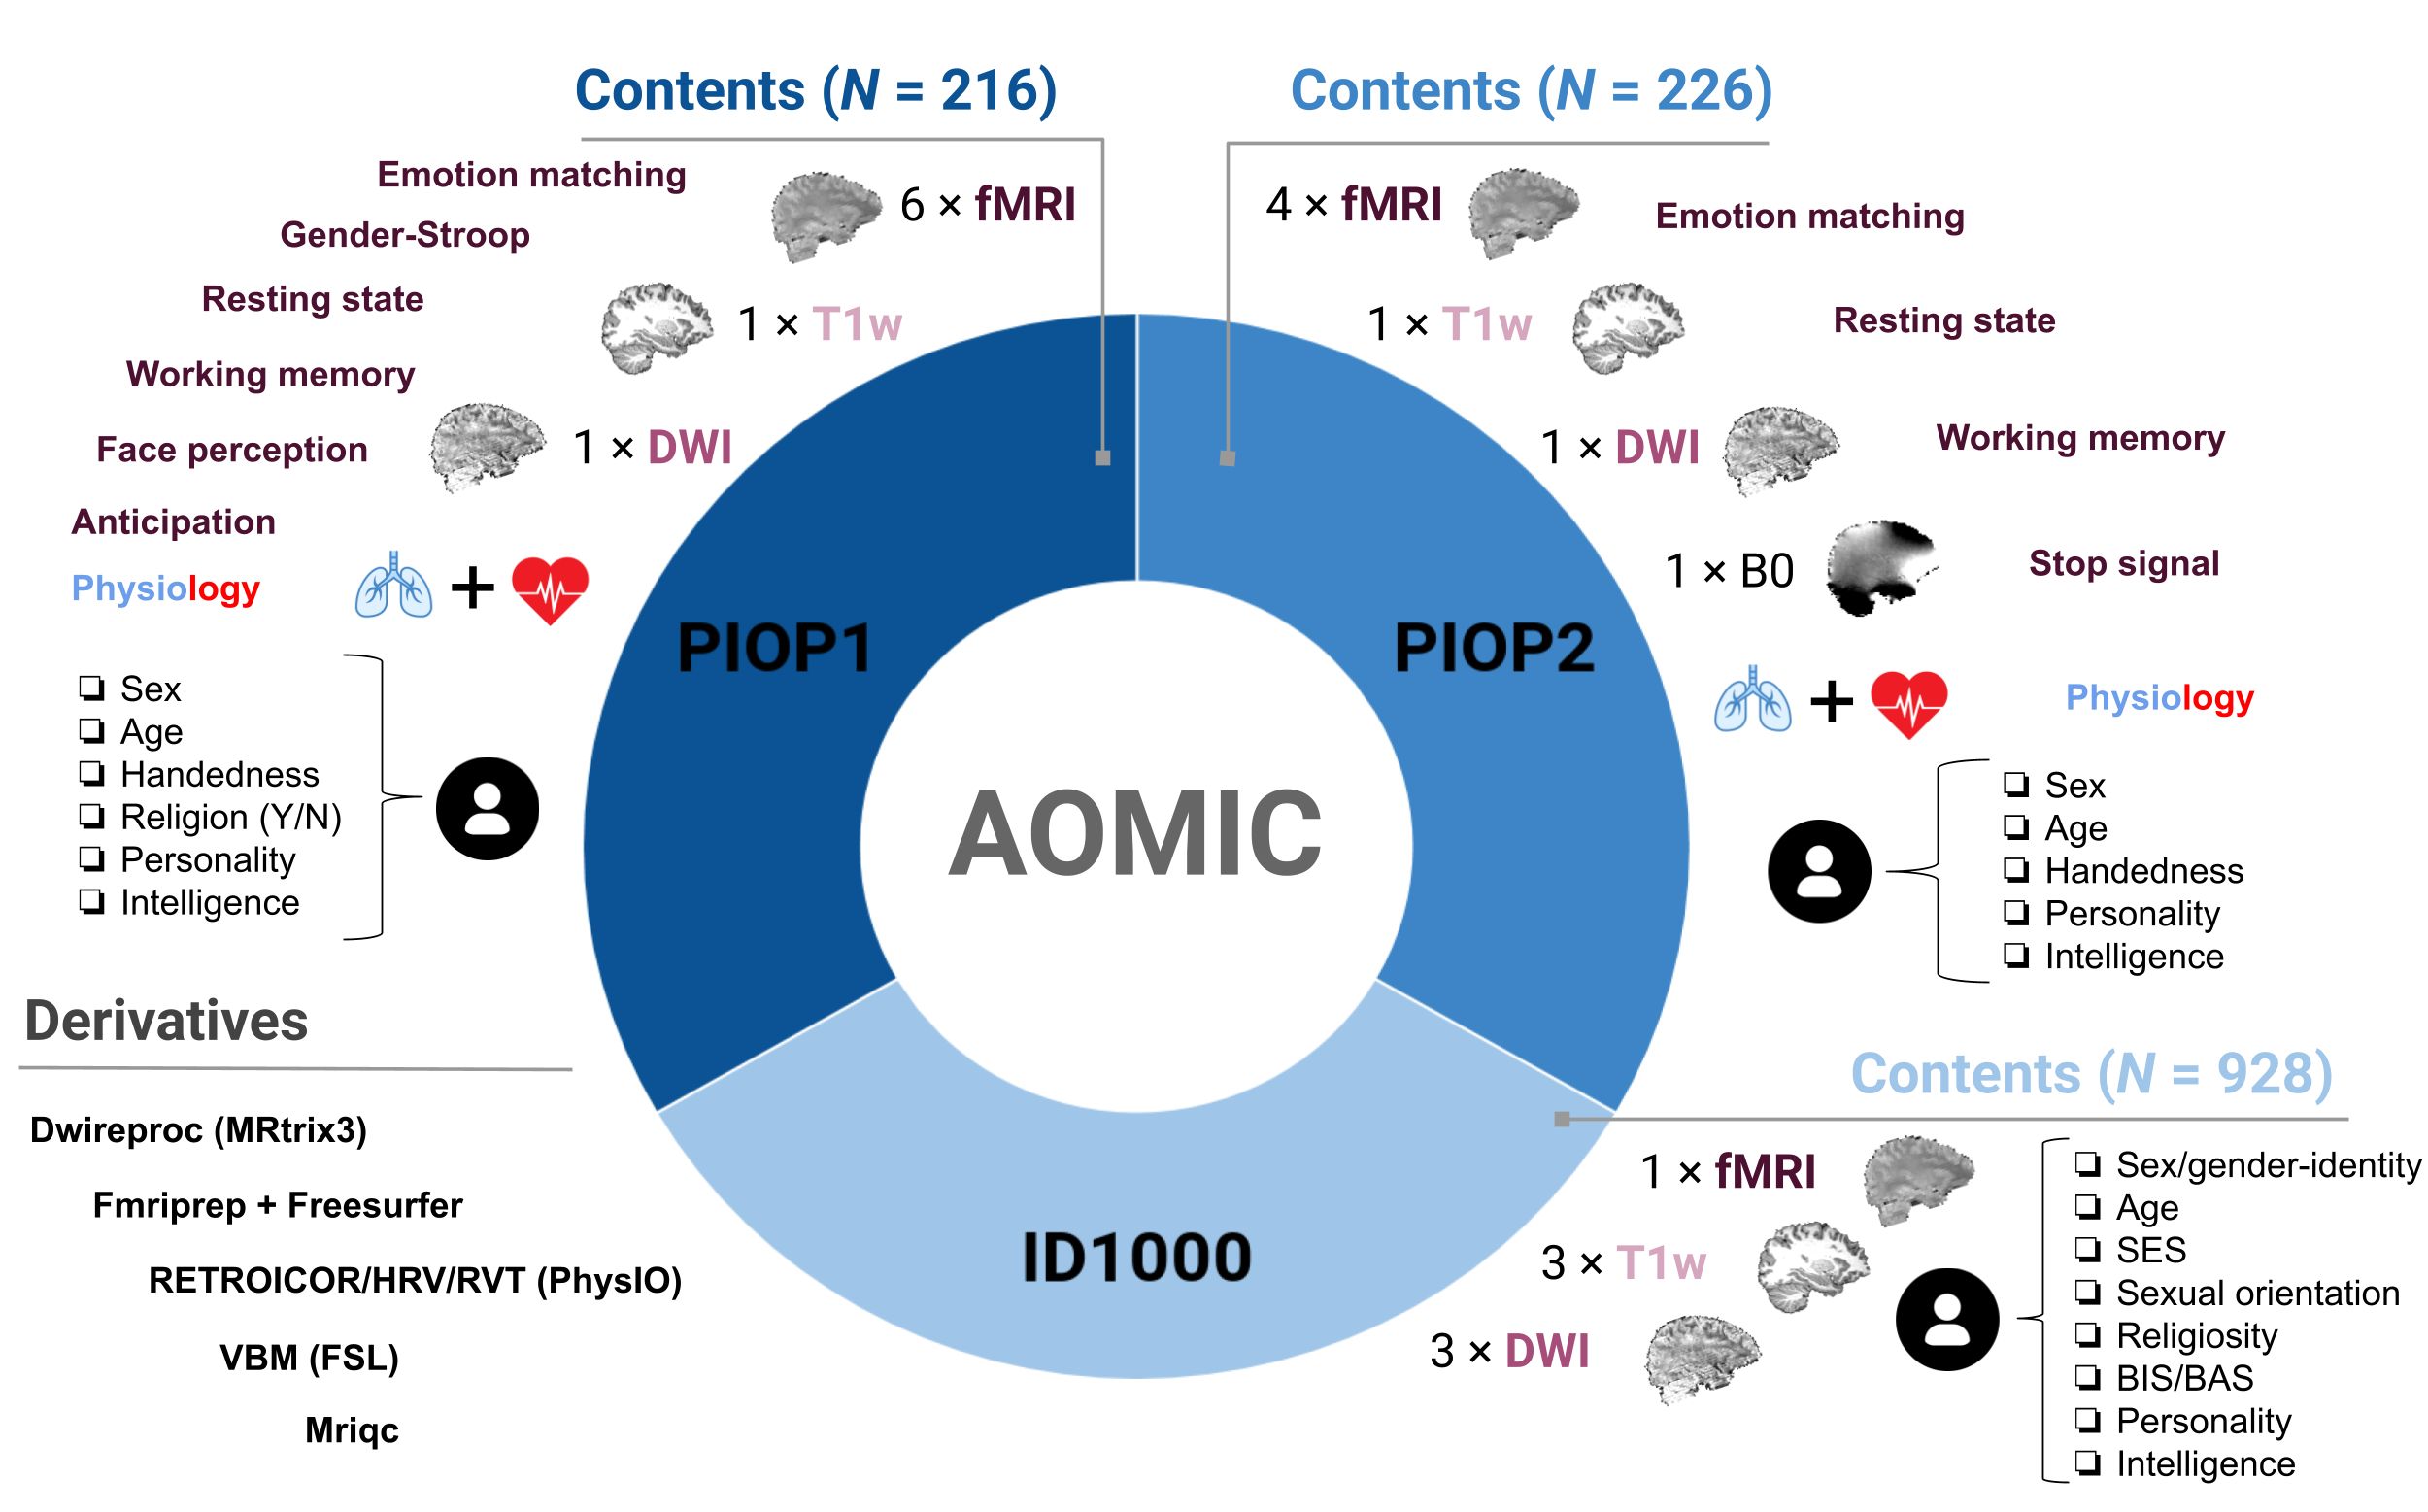 General overview of AOMIC’s contents. Each dataset (ID1000, PIOP1, PIOP2) contains multimodal MRI data, physiology (concurrent with fMRI acquisition), demographic and psychometric data, as well as a large set of “derivatives”, i.e., data derived from the original “raw” data through state-of-the-art preprocessing pipelines.